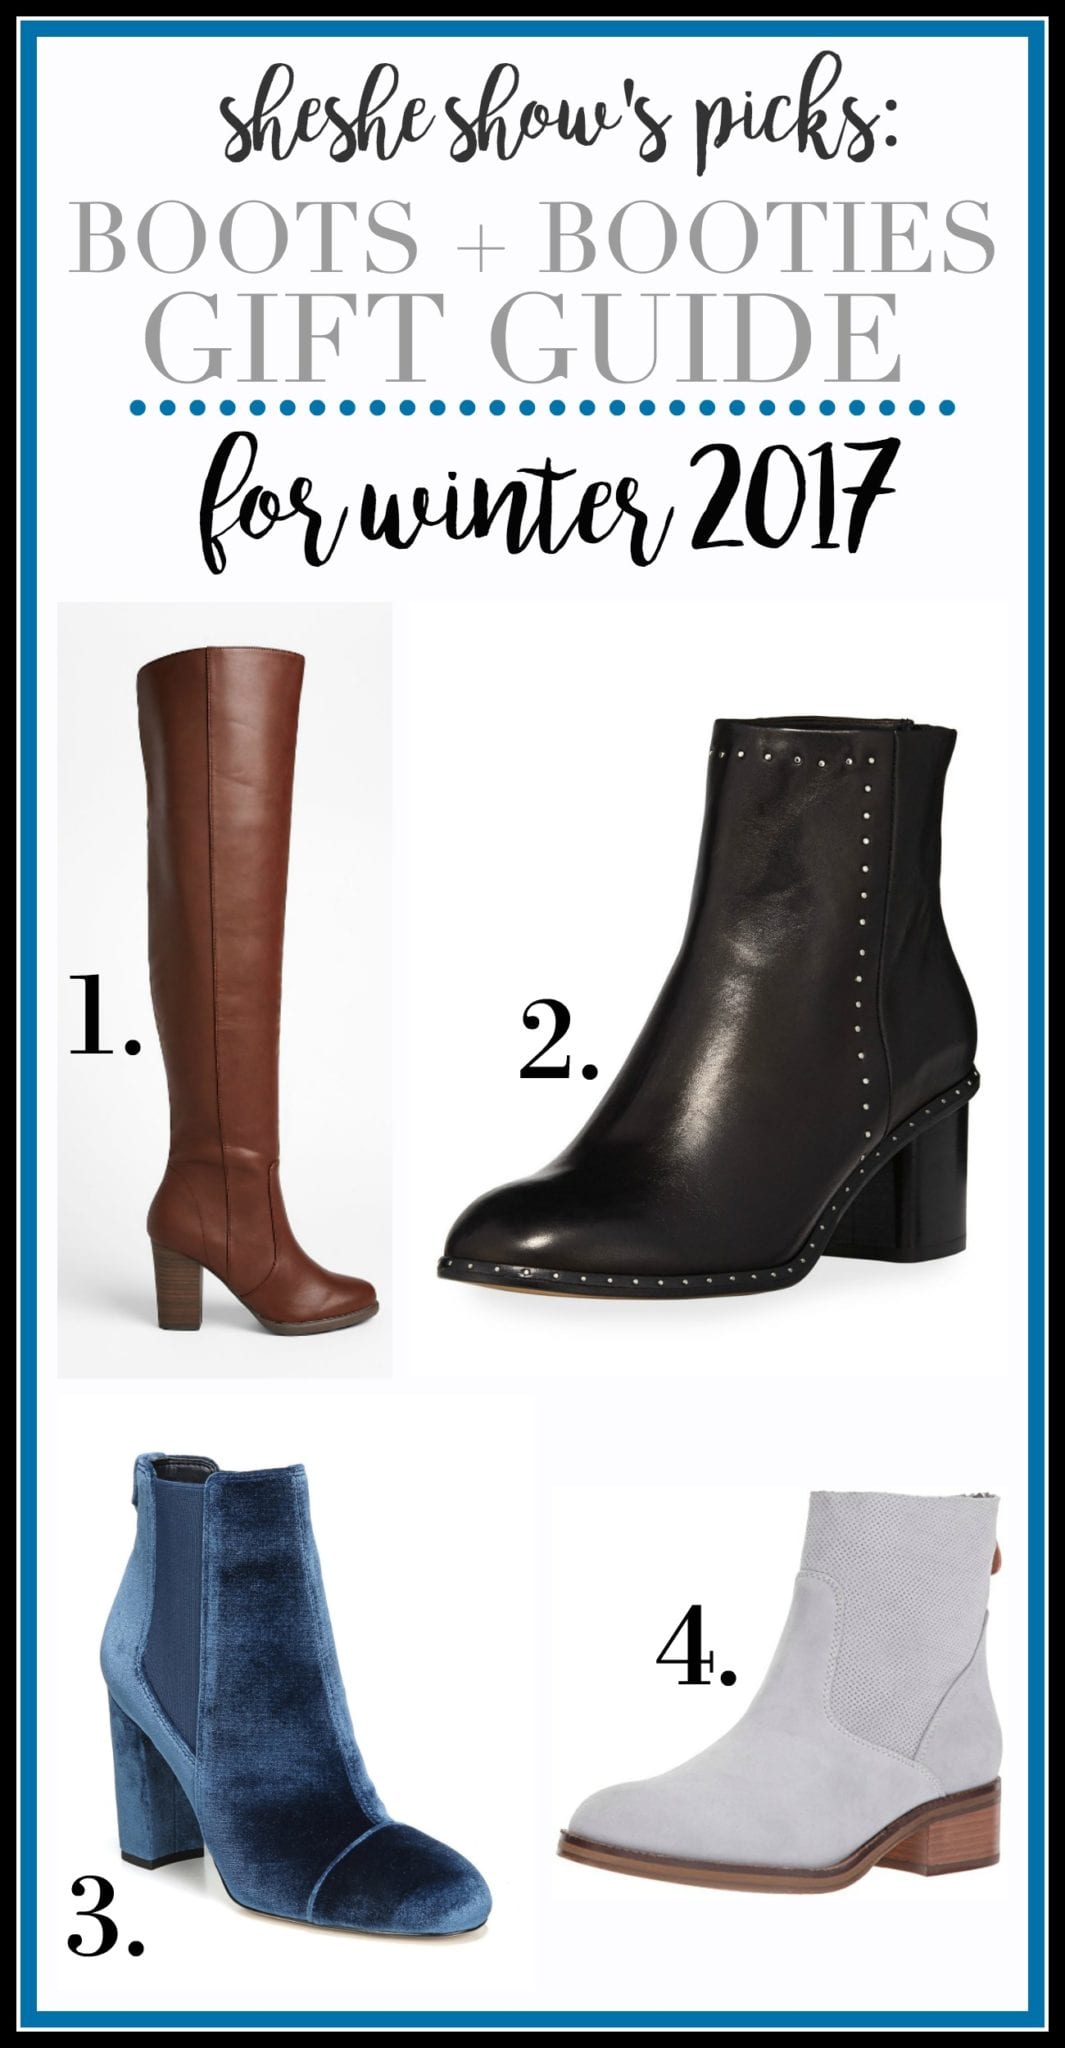 boots, booties, winter, holiday, gift guide, 2017, sheshe show, gifts